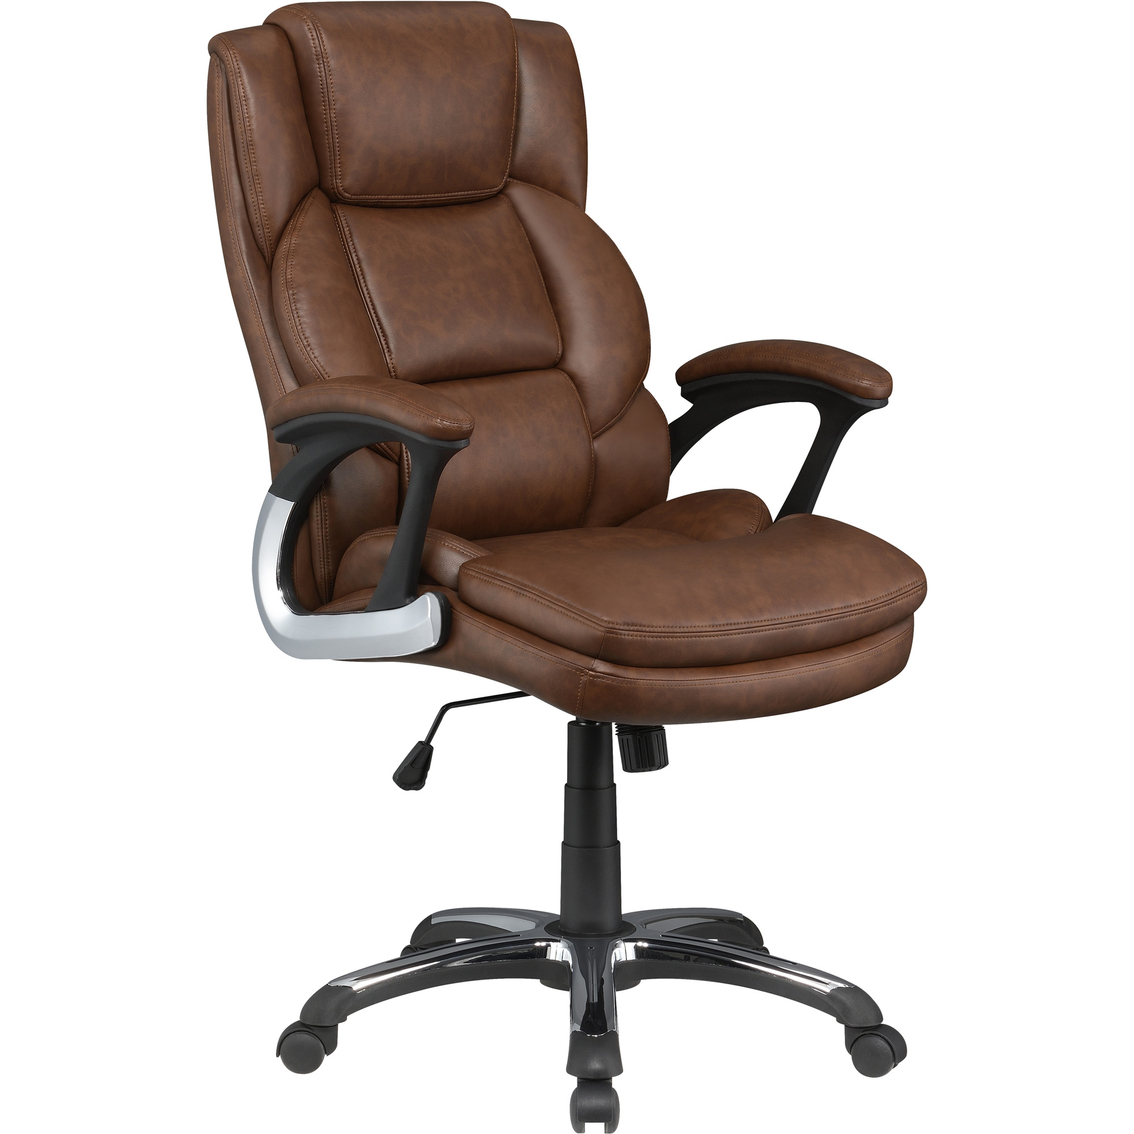 Coaster Brown Weathered Leatherette Adjustable Height Office Chair with Padded Arms - Image 3 of 6